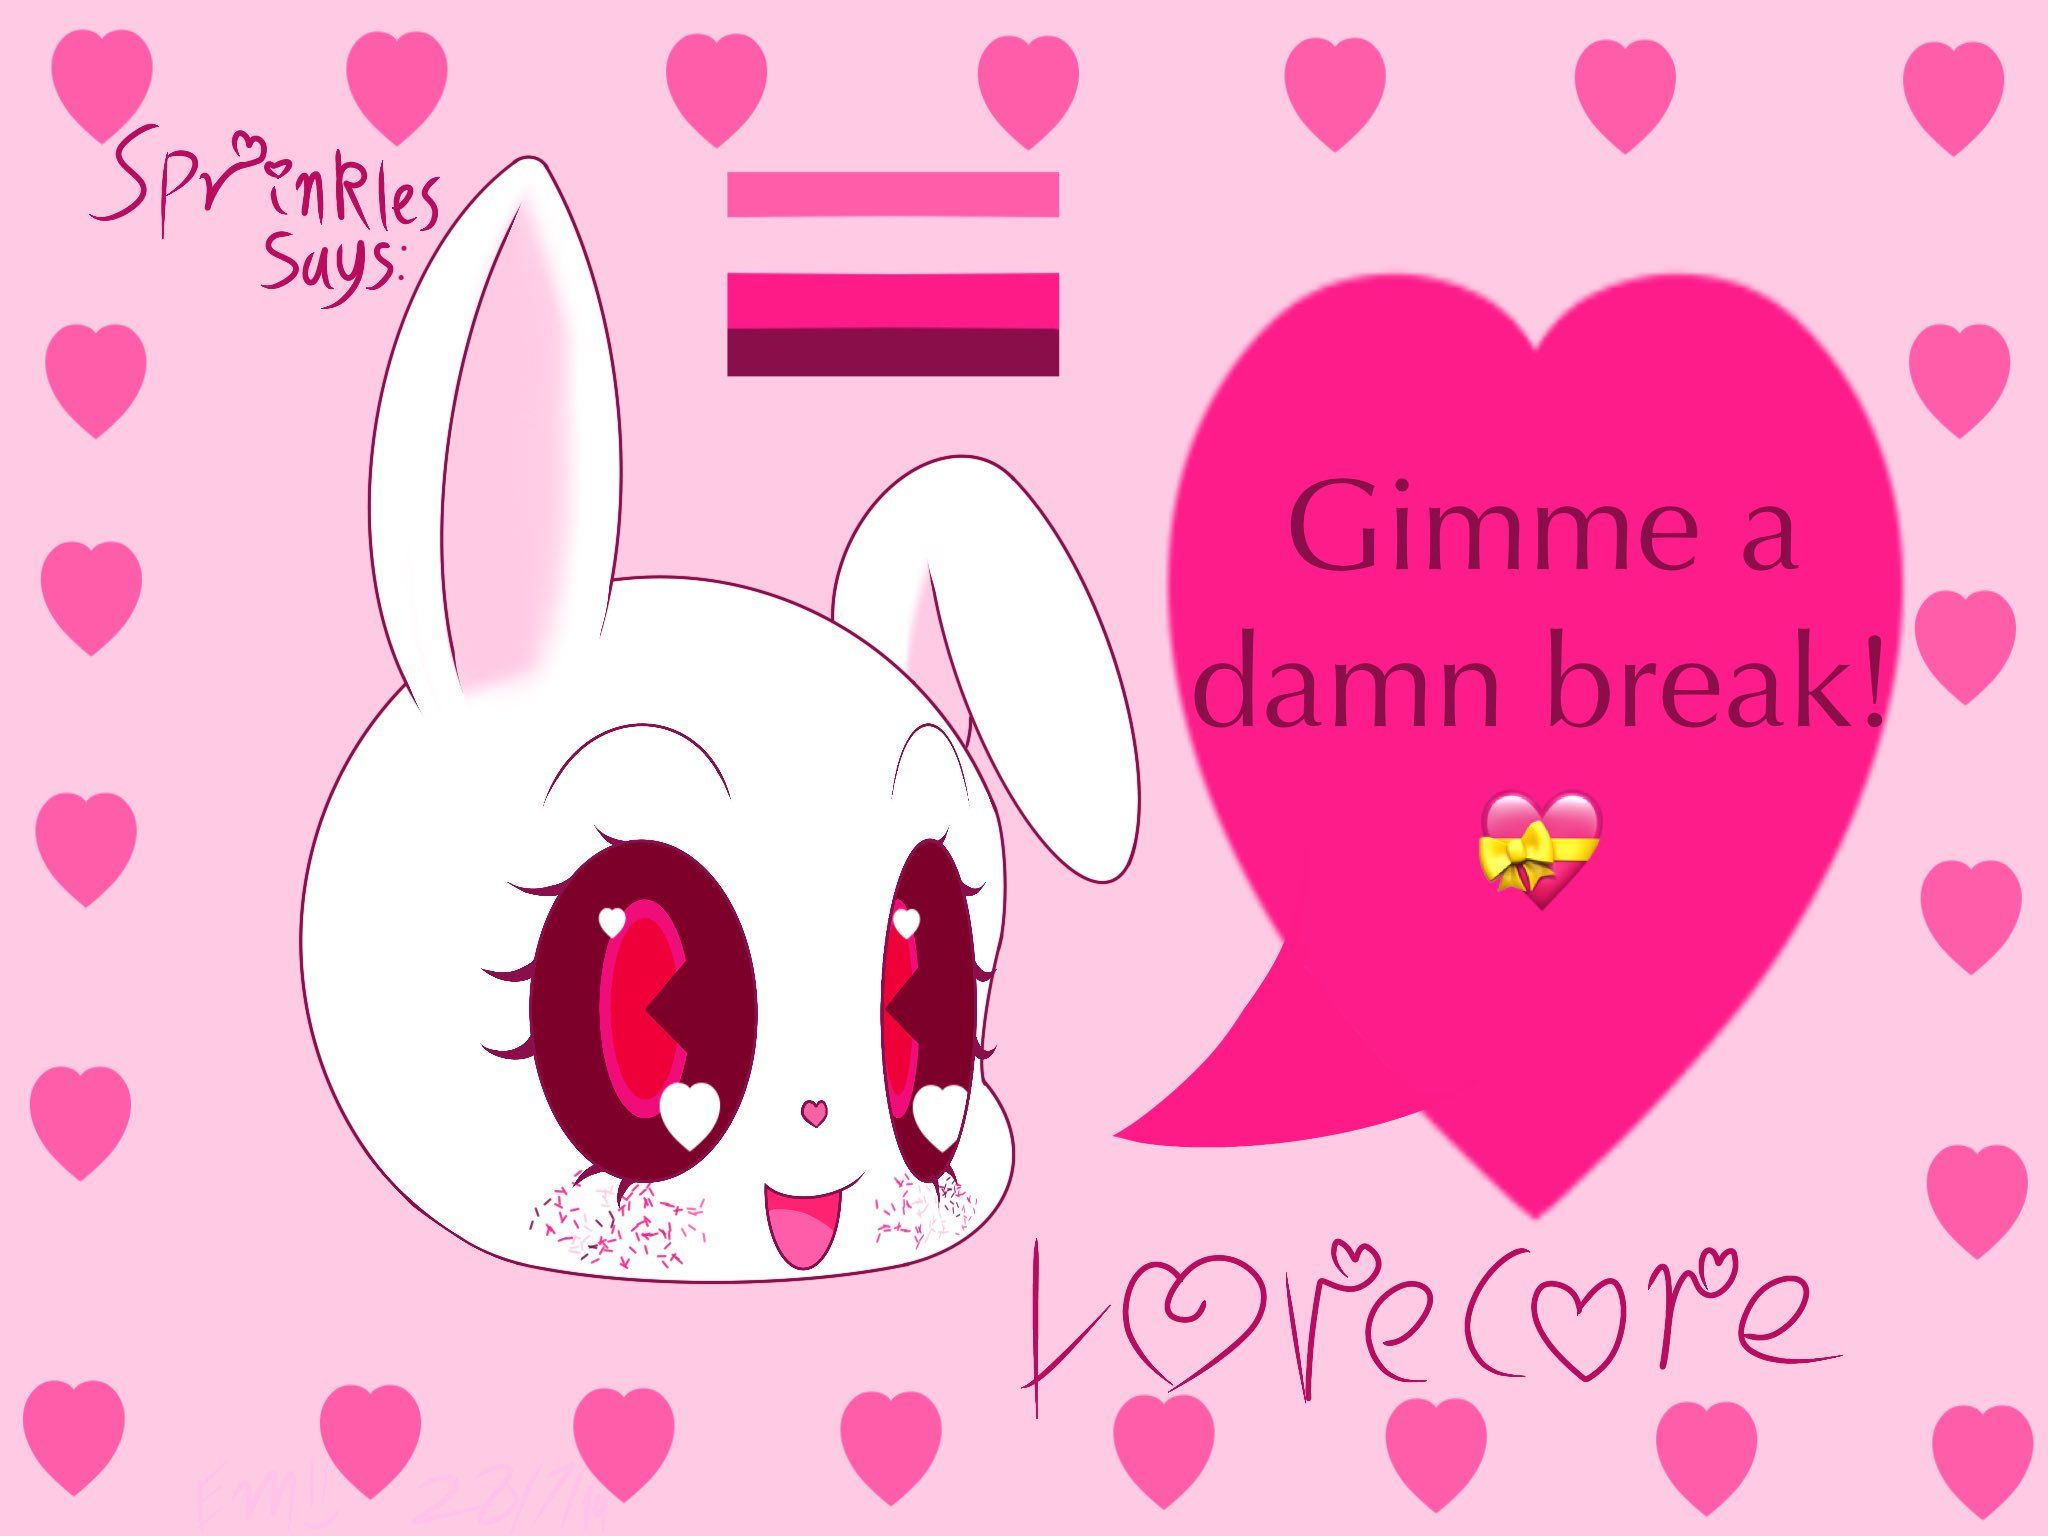 A pink background with a white bunny on the left side of the screen. The bunny has a pink bow on its left ear, a pink heart on its right eye, and a pink heart on its left eye. The bunny has a pink bow on its left ear. The bunny has a pink heart on its right eye and a red heart on its left eye. The bunny has a pink bow on its left ear. The bunny has a pink heart on its right eye and a red heart on its left eye. The bunny has a pink bow on its left ear. The bunny has a pink heart on its right eye and a red heart on its left eye. The bunny has a pink bow on its left ear. The bunny has a pink heart on its right eye and a red heart on its left eye. The bunny has a pink bow on its left ear. The bunny has a pink heart on its right eye and a red heart on its left eye. The bunny has a pink bow on its left ear. The bunny has a pink heart on its right eye and a red heart on its left eye. The bunny has a pink bow on its left ear. The bunny has a pink heart on its right eye and a red heart on its left eye. The bunny has a pink bow on its left ear. The bunny has a pink heart on its right eye and a red heart on its left eye. The bunny has a pink bow on its left ear. The bunny has a pink heart on its right eye and a red heart on its left eye. The bunny has a pink bow on its left ear. The bunny has a pink heart on its right eye and a red heart on its left eye. The bunny has a pink bow on its left ear. The bunny has a pink heart on its right eye and a red heart on its left eye. The bunny has a pink bow on its left ear. The bunny has a pink heart on its right eye and a red heart on its left eye. The bunny has a pink bow on its left ear. The bunny has a pink heart on its right eye and a red heart on its left eye. The bunny has a pink bow on its left ear. The bunny has a pink heart on its right eye and a red heart on its left eye. The bunny has a pink bow on its left ear. The bunny has a pink heart on its right eye and a red heart on its left eye. The bunny has a pink bow on its left ear. The bunny has a pink heart on - Lovecore